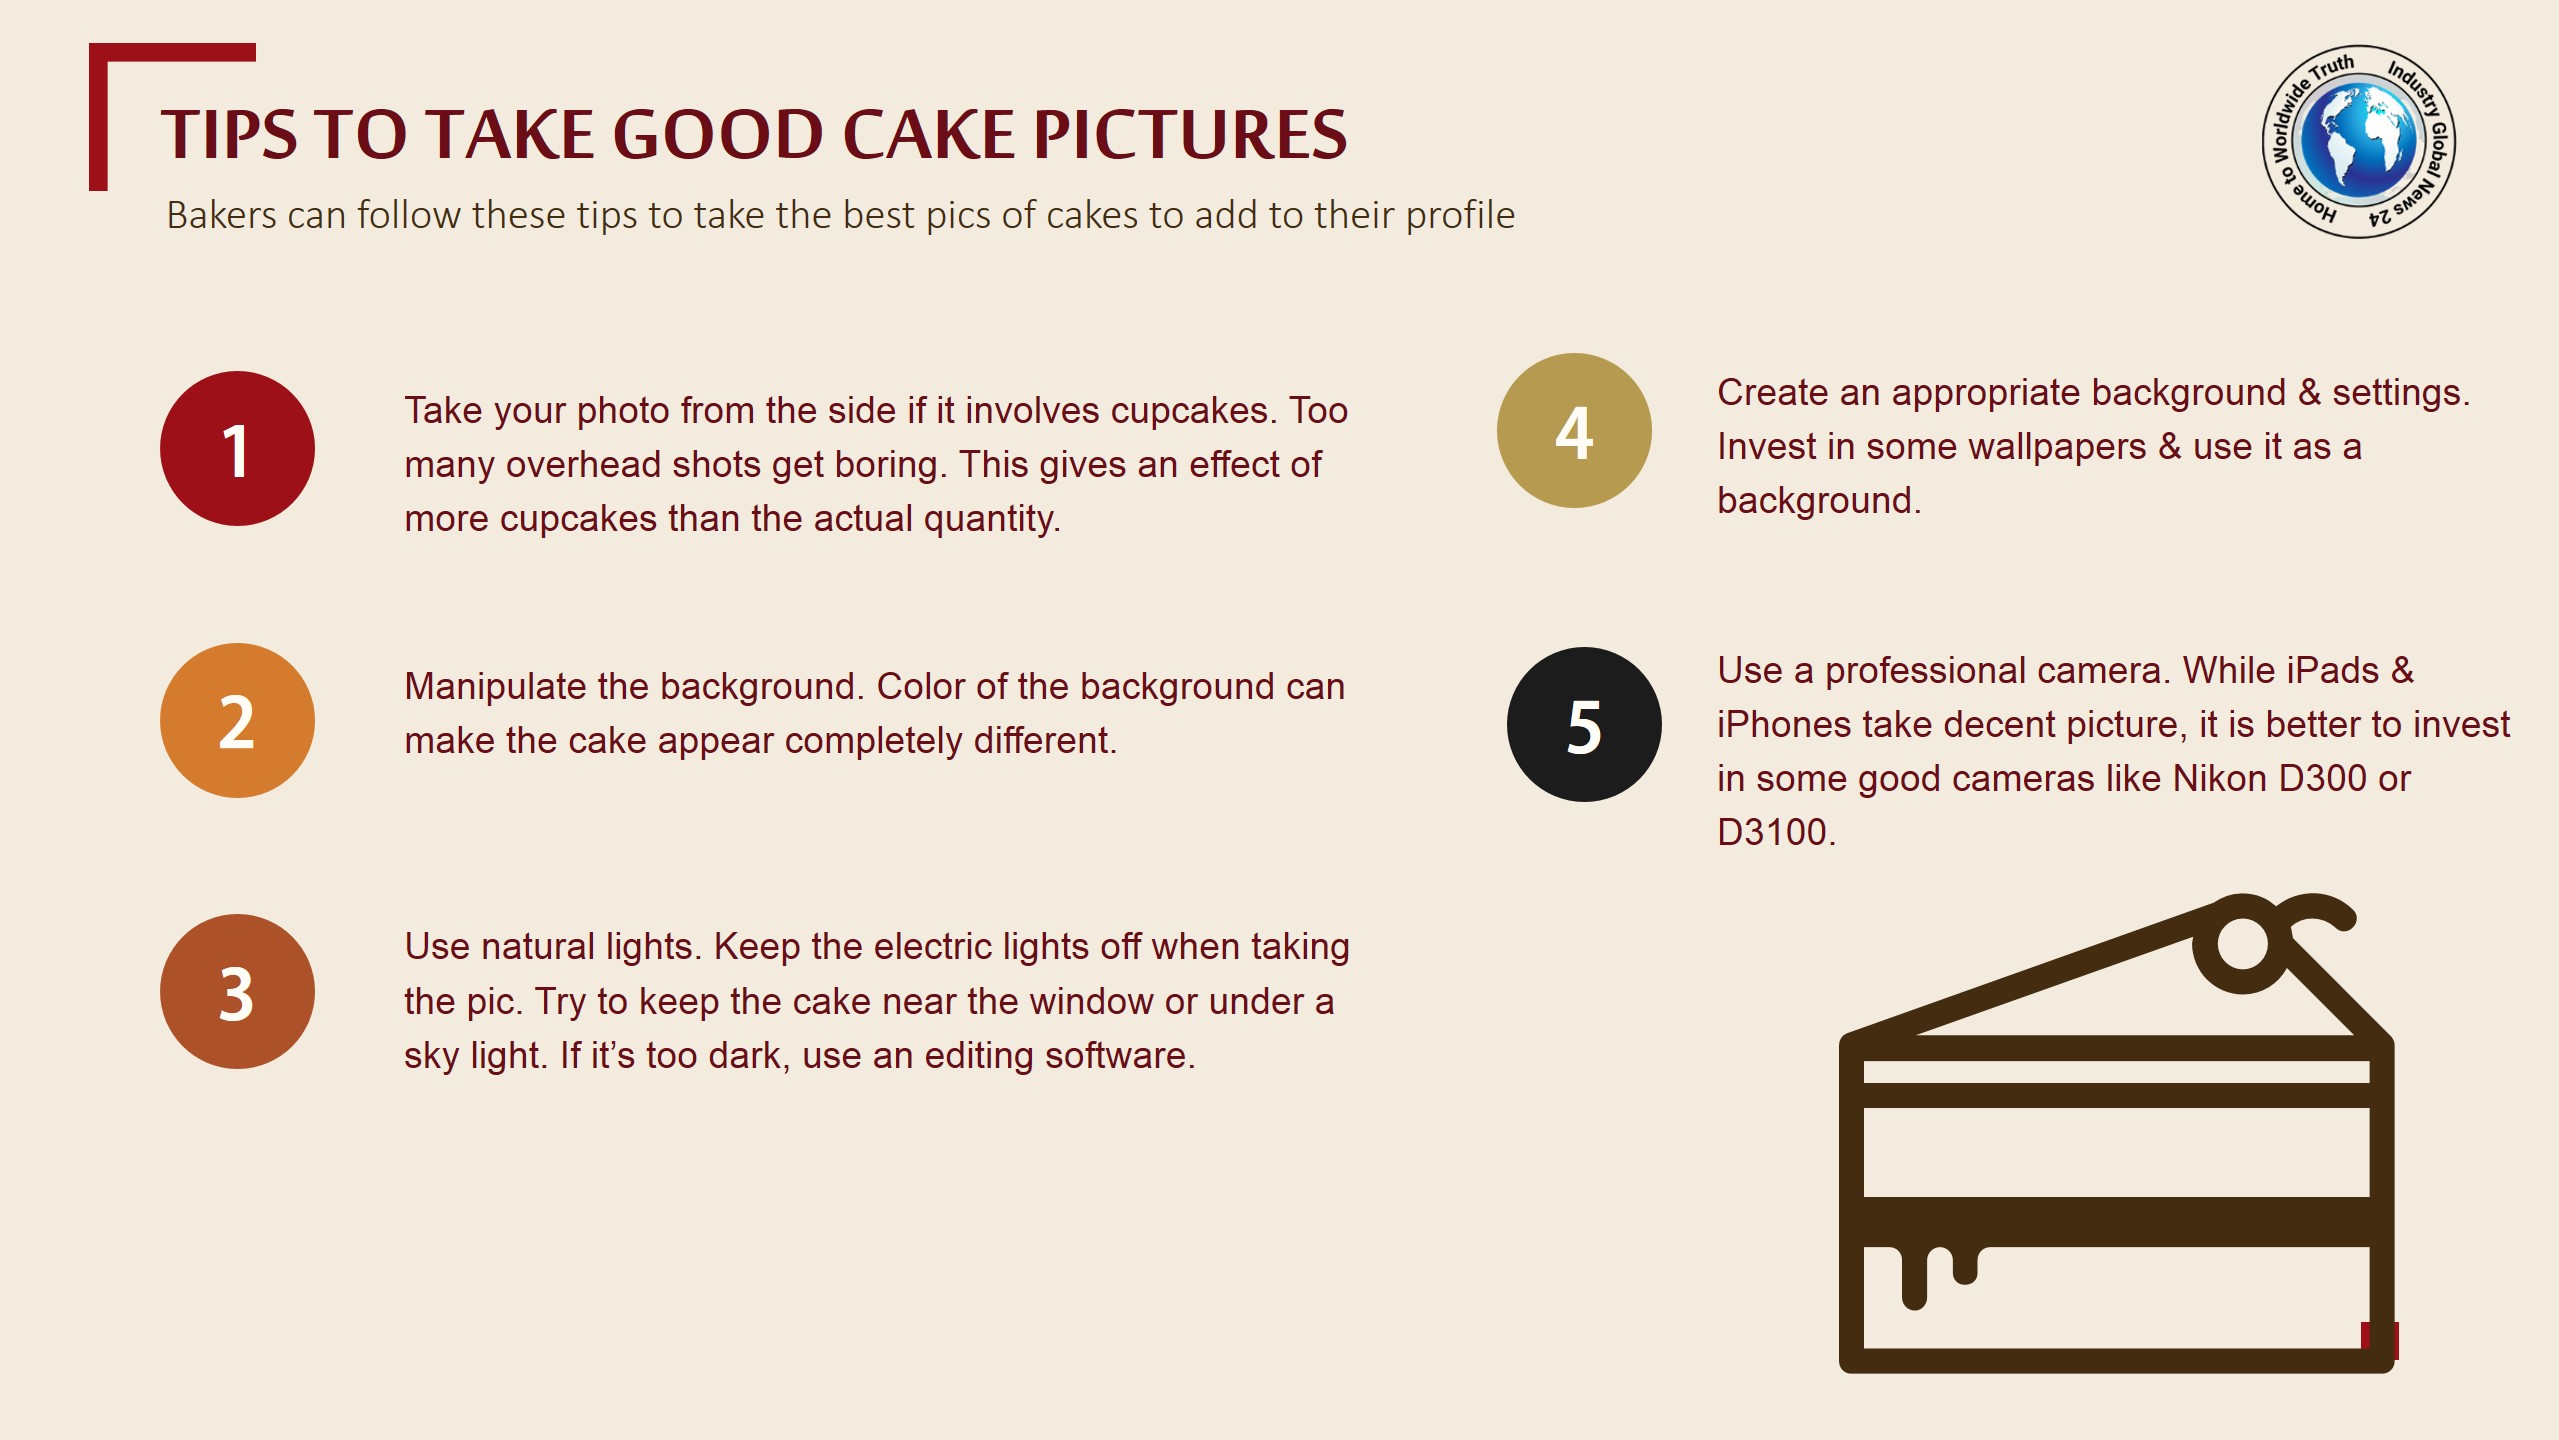 Tips to take good cake pictures